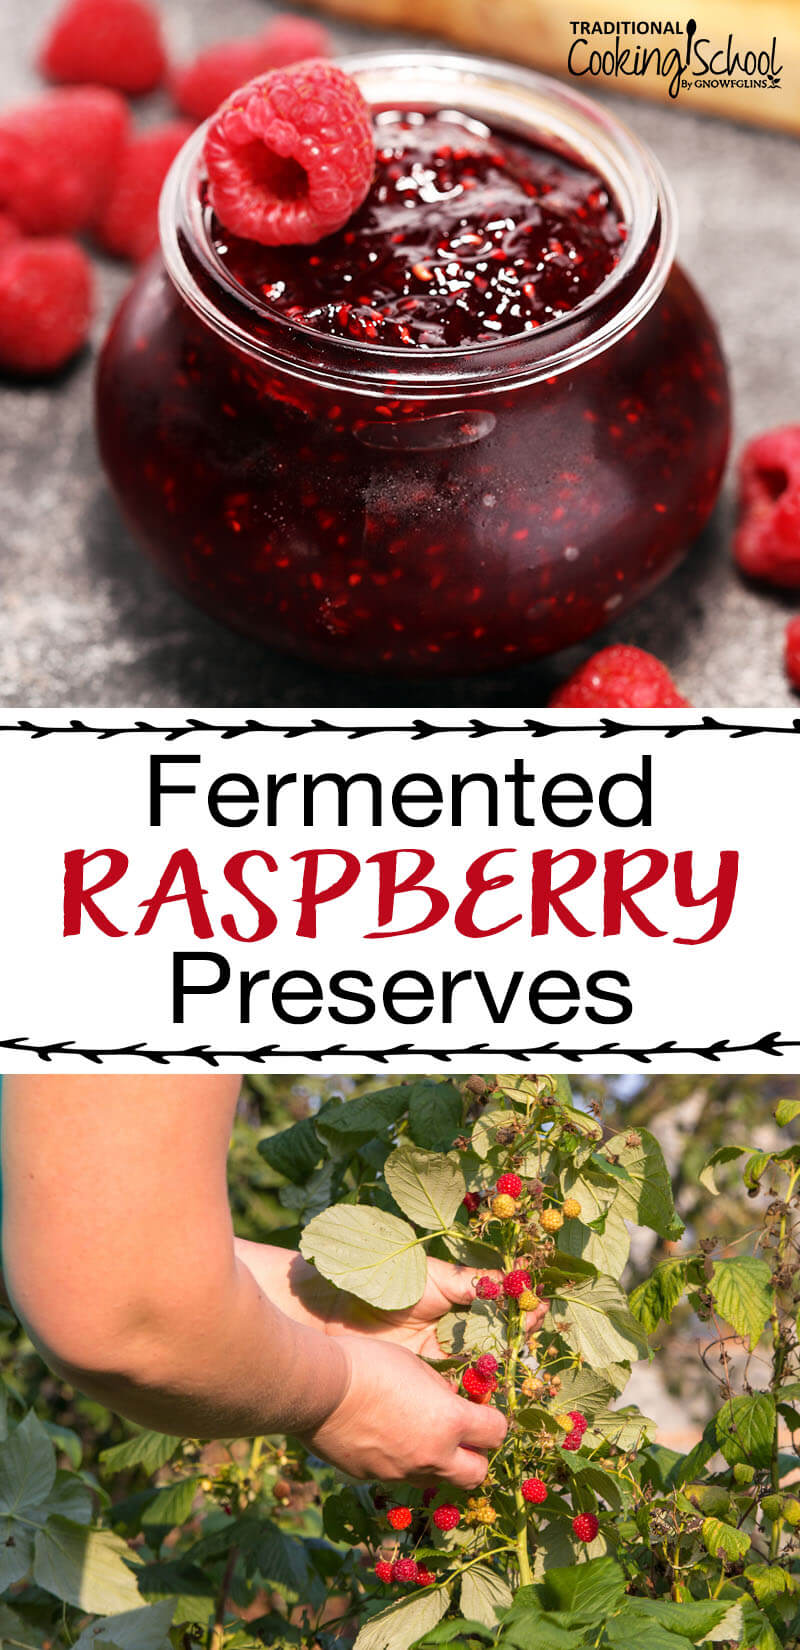 Fermented Raspberry Preserves | My favorite way to preserve raspberries is to make a lacto-fermented preserve. This increases vitamins, enzymes and probiotics making these preserves even better then the berries alone. | TraditionalCookingSchool.com